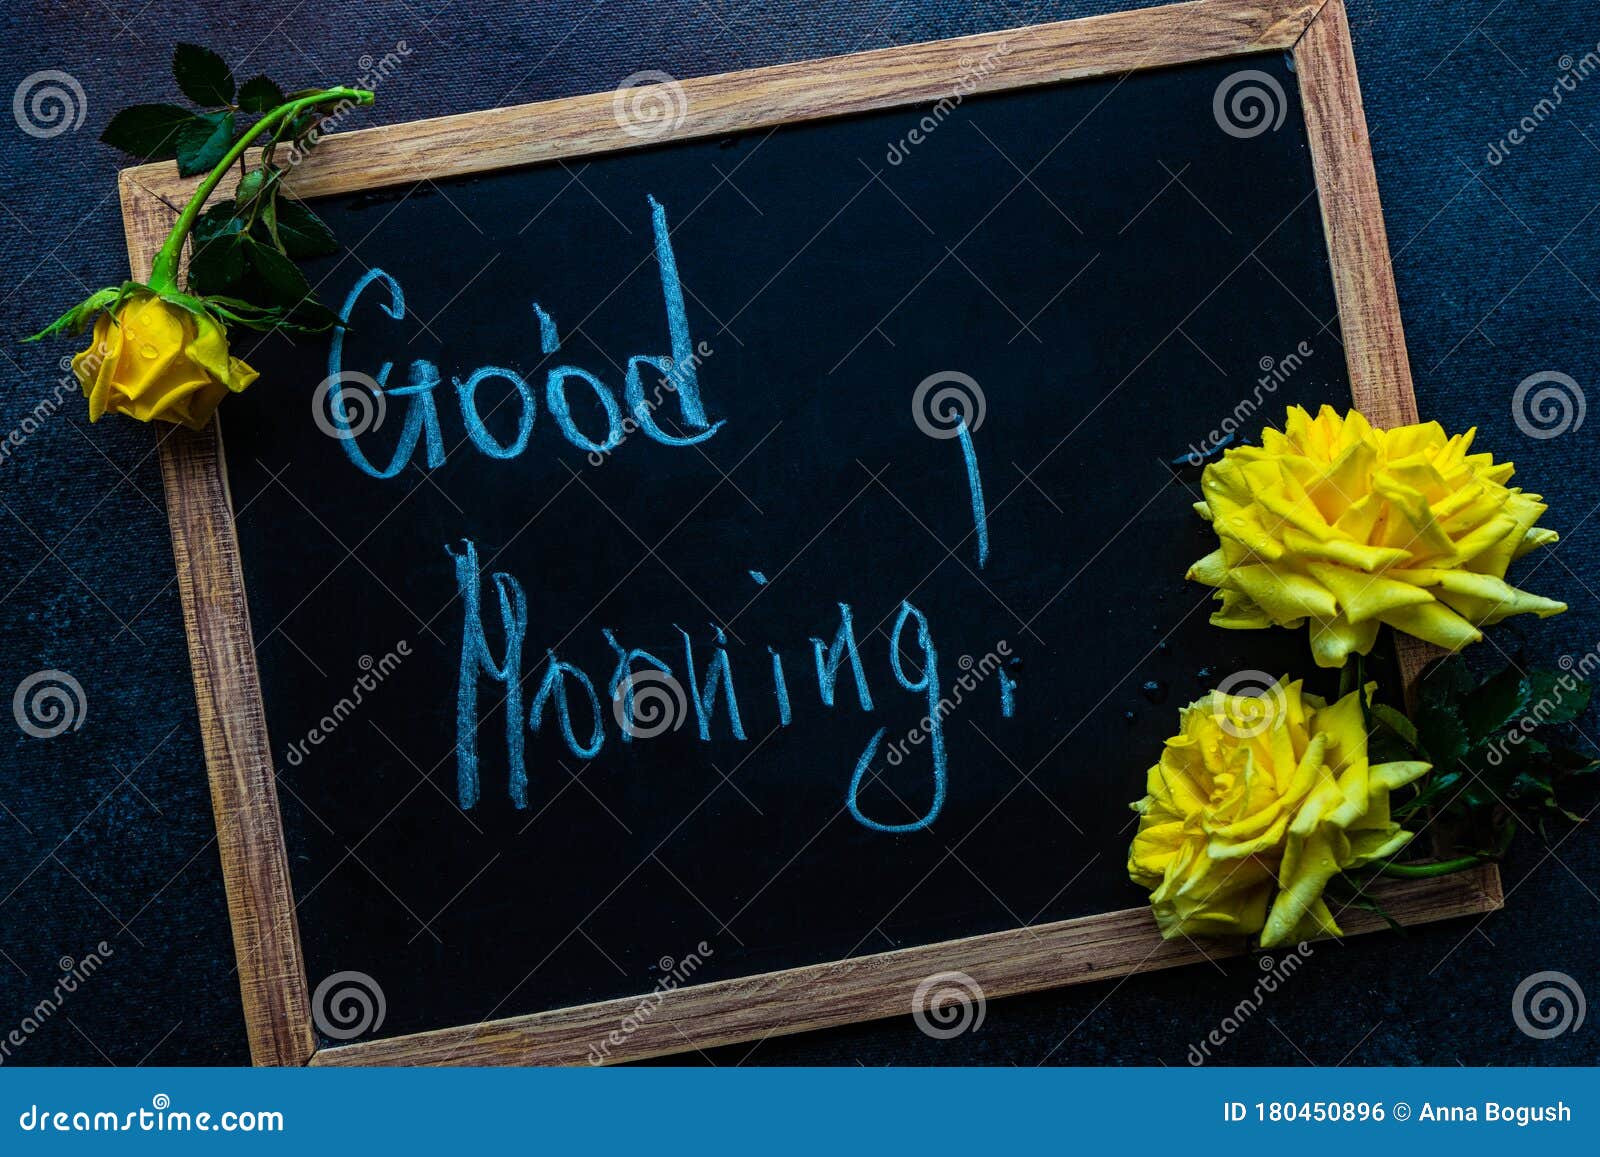 Good Morning Concept with Yellow Roses Stock Photo - Image of ...